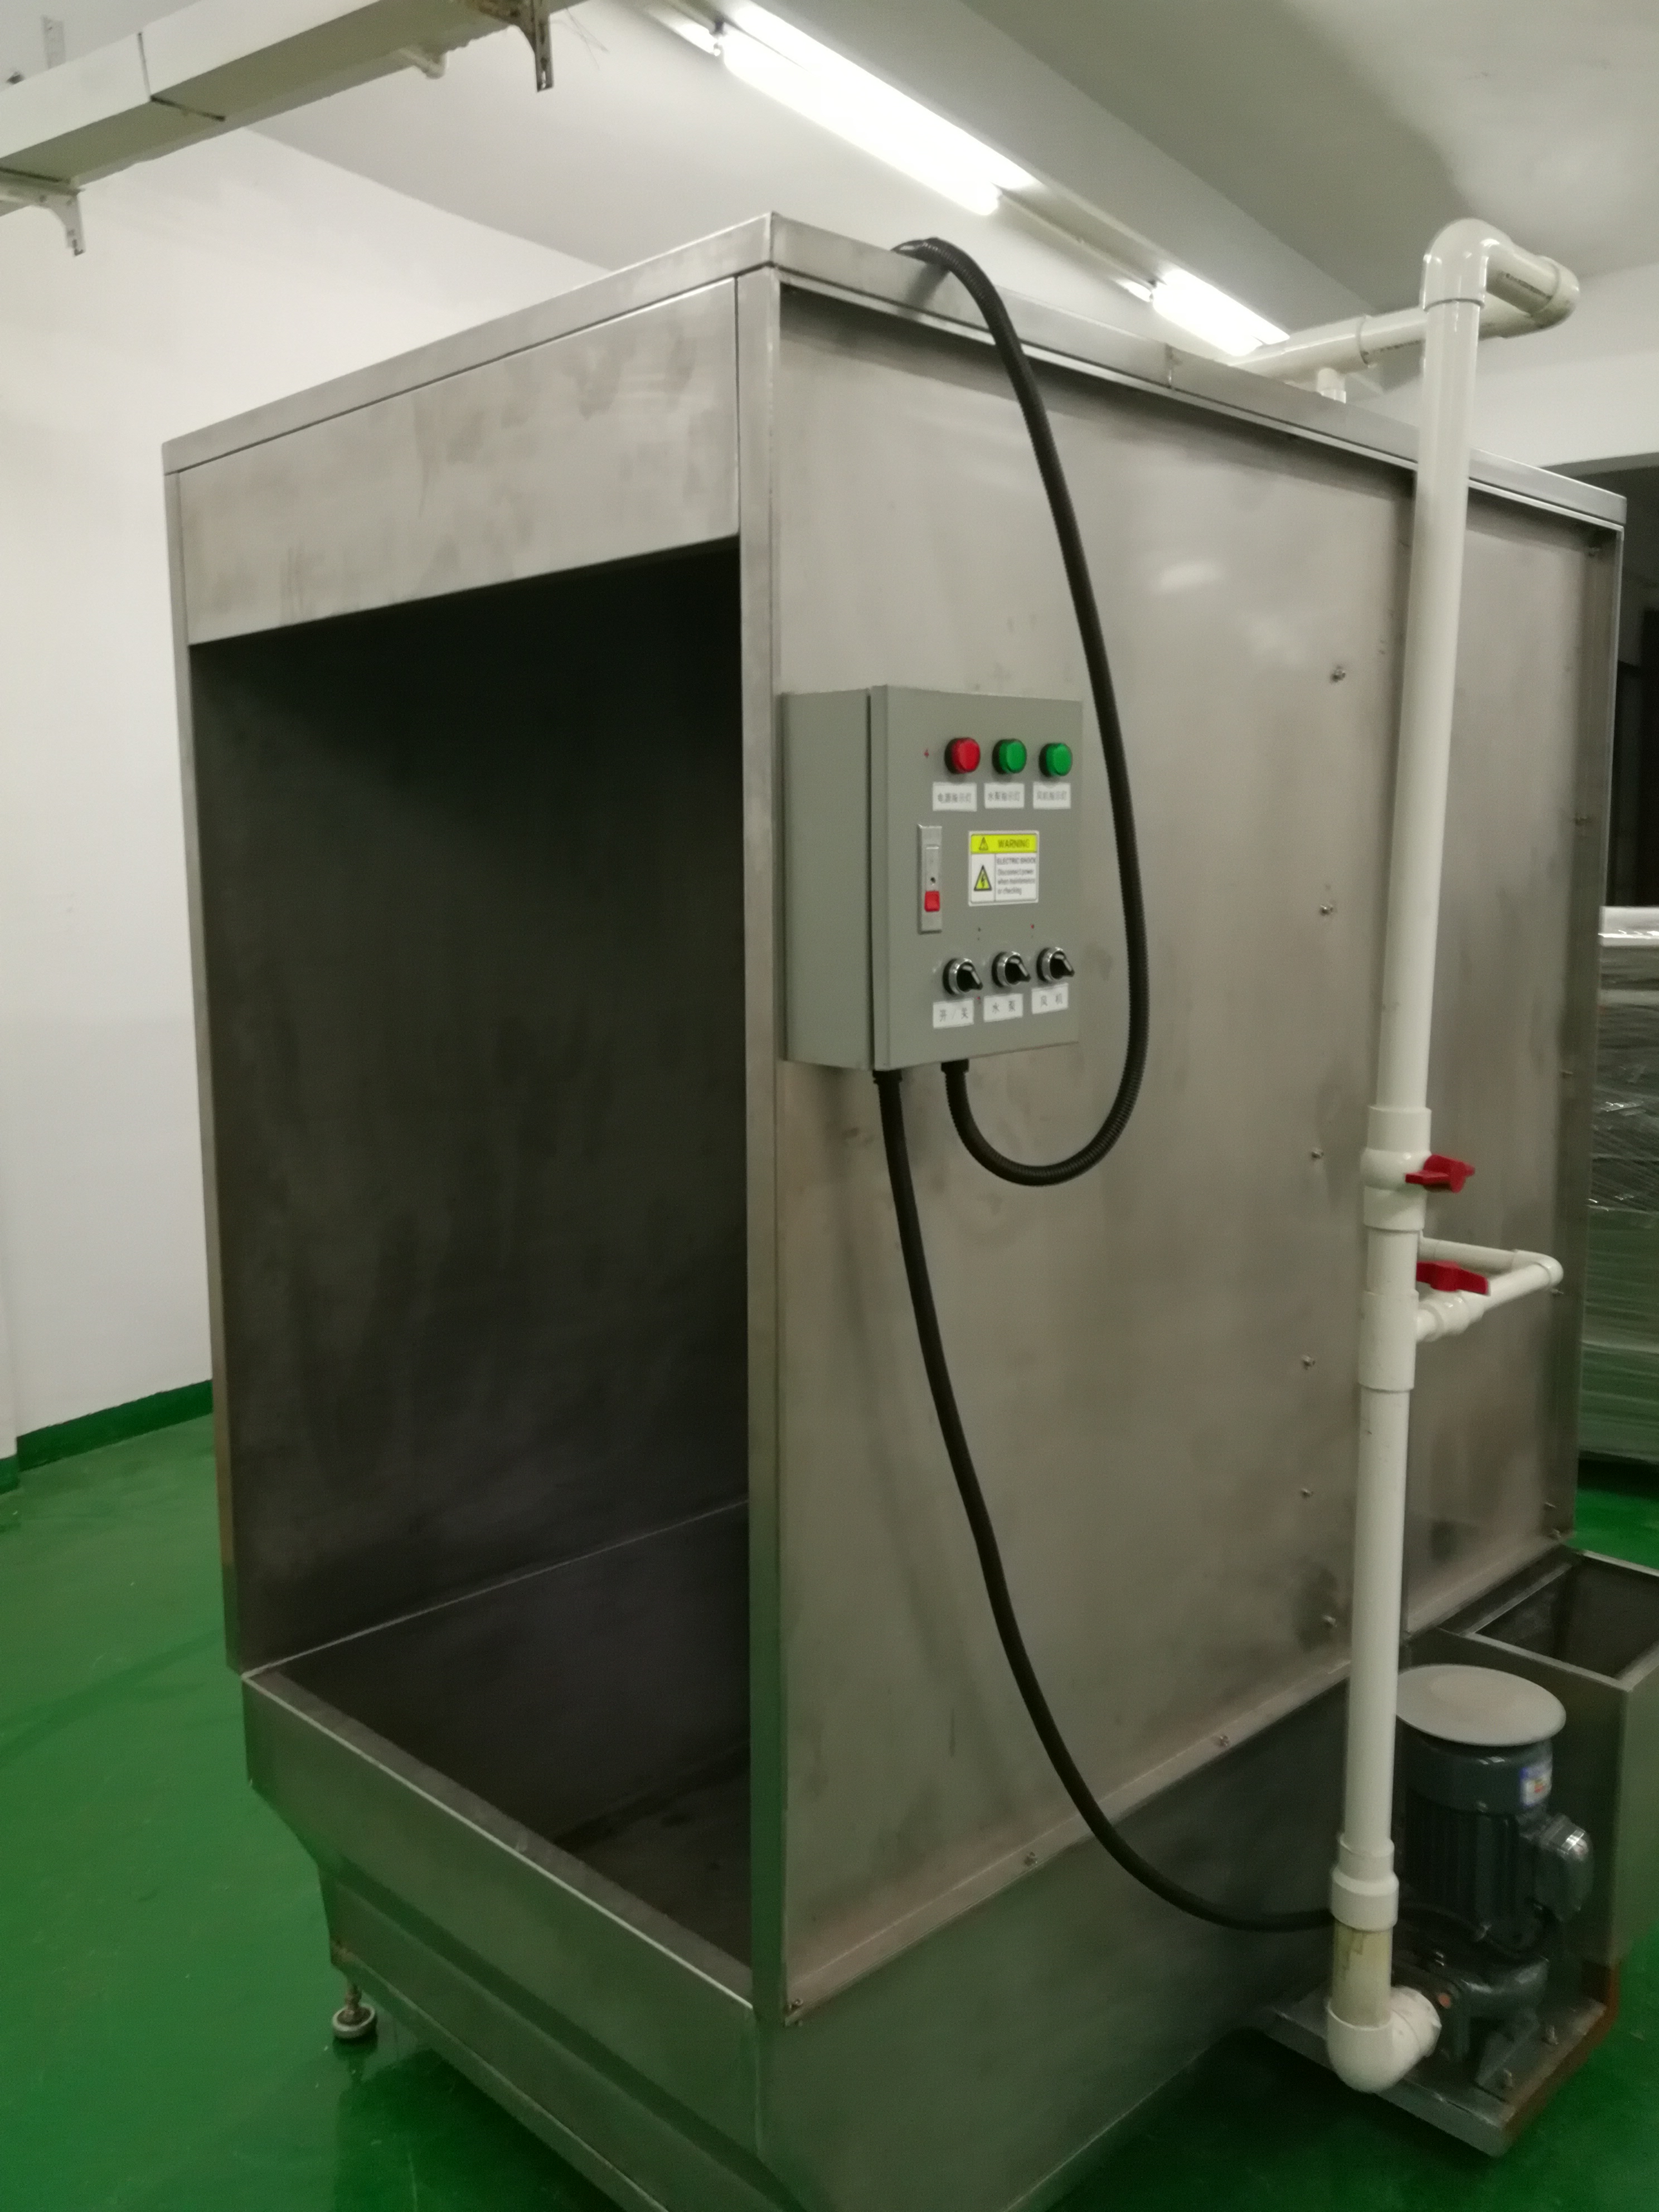 Fuel injection cabinet (water curtain cabinet)